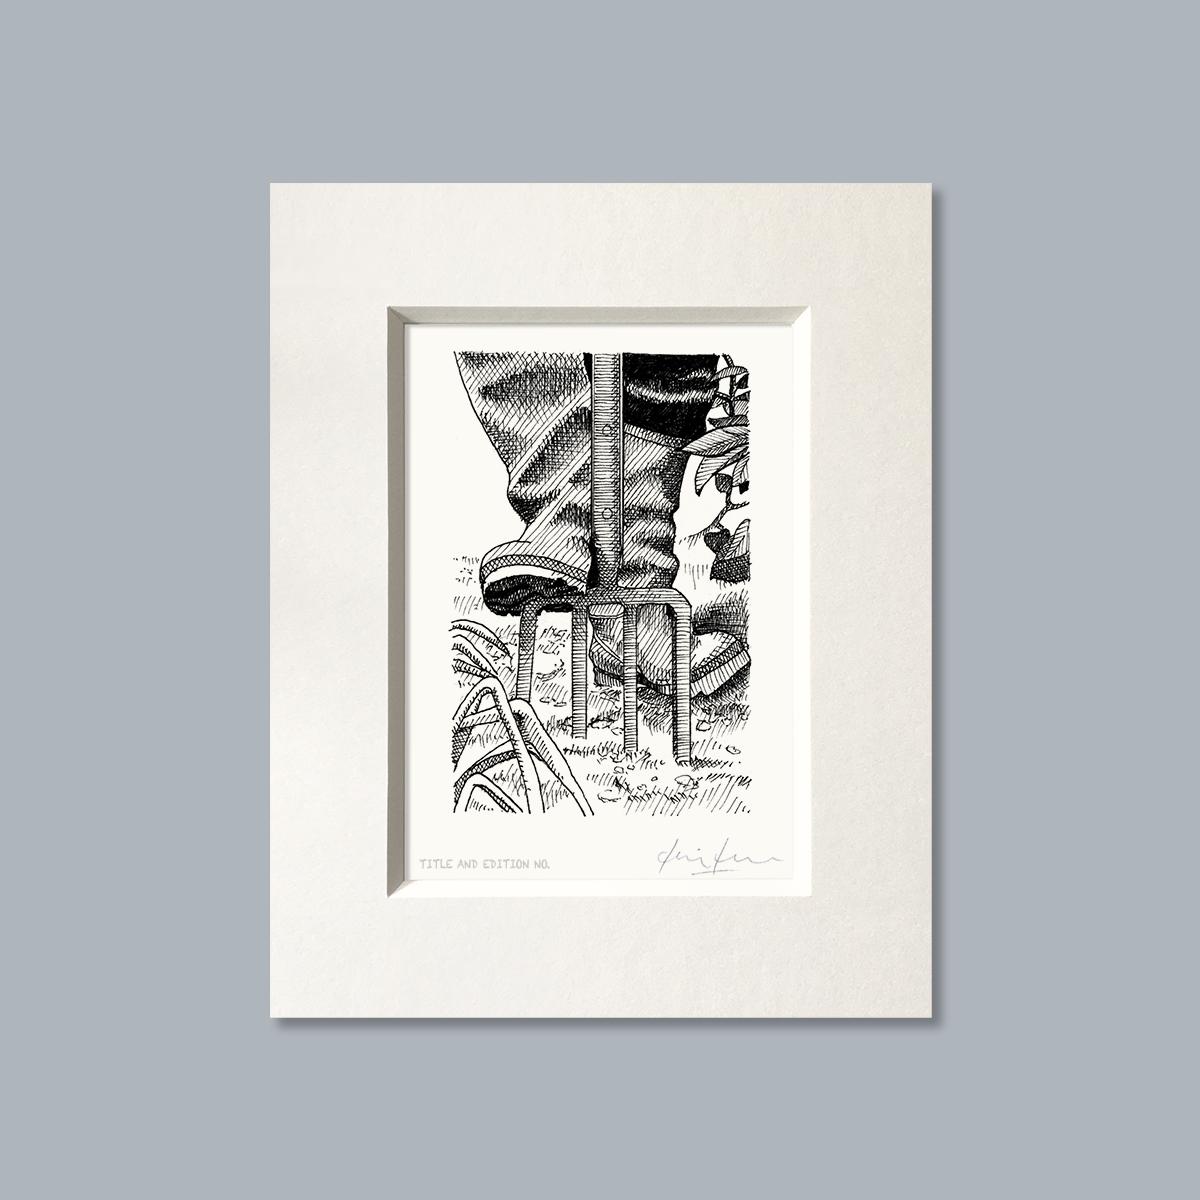 Limited edition print from pen and ink drawing of someone digging in a white mount